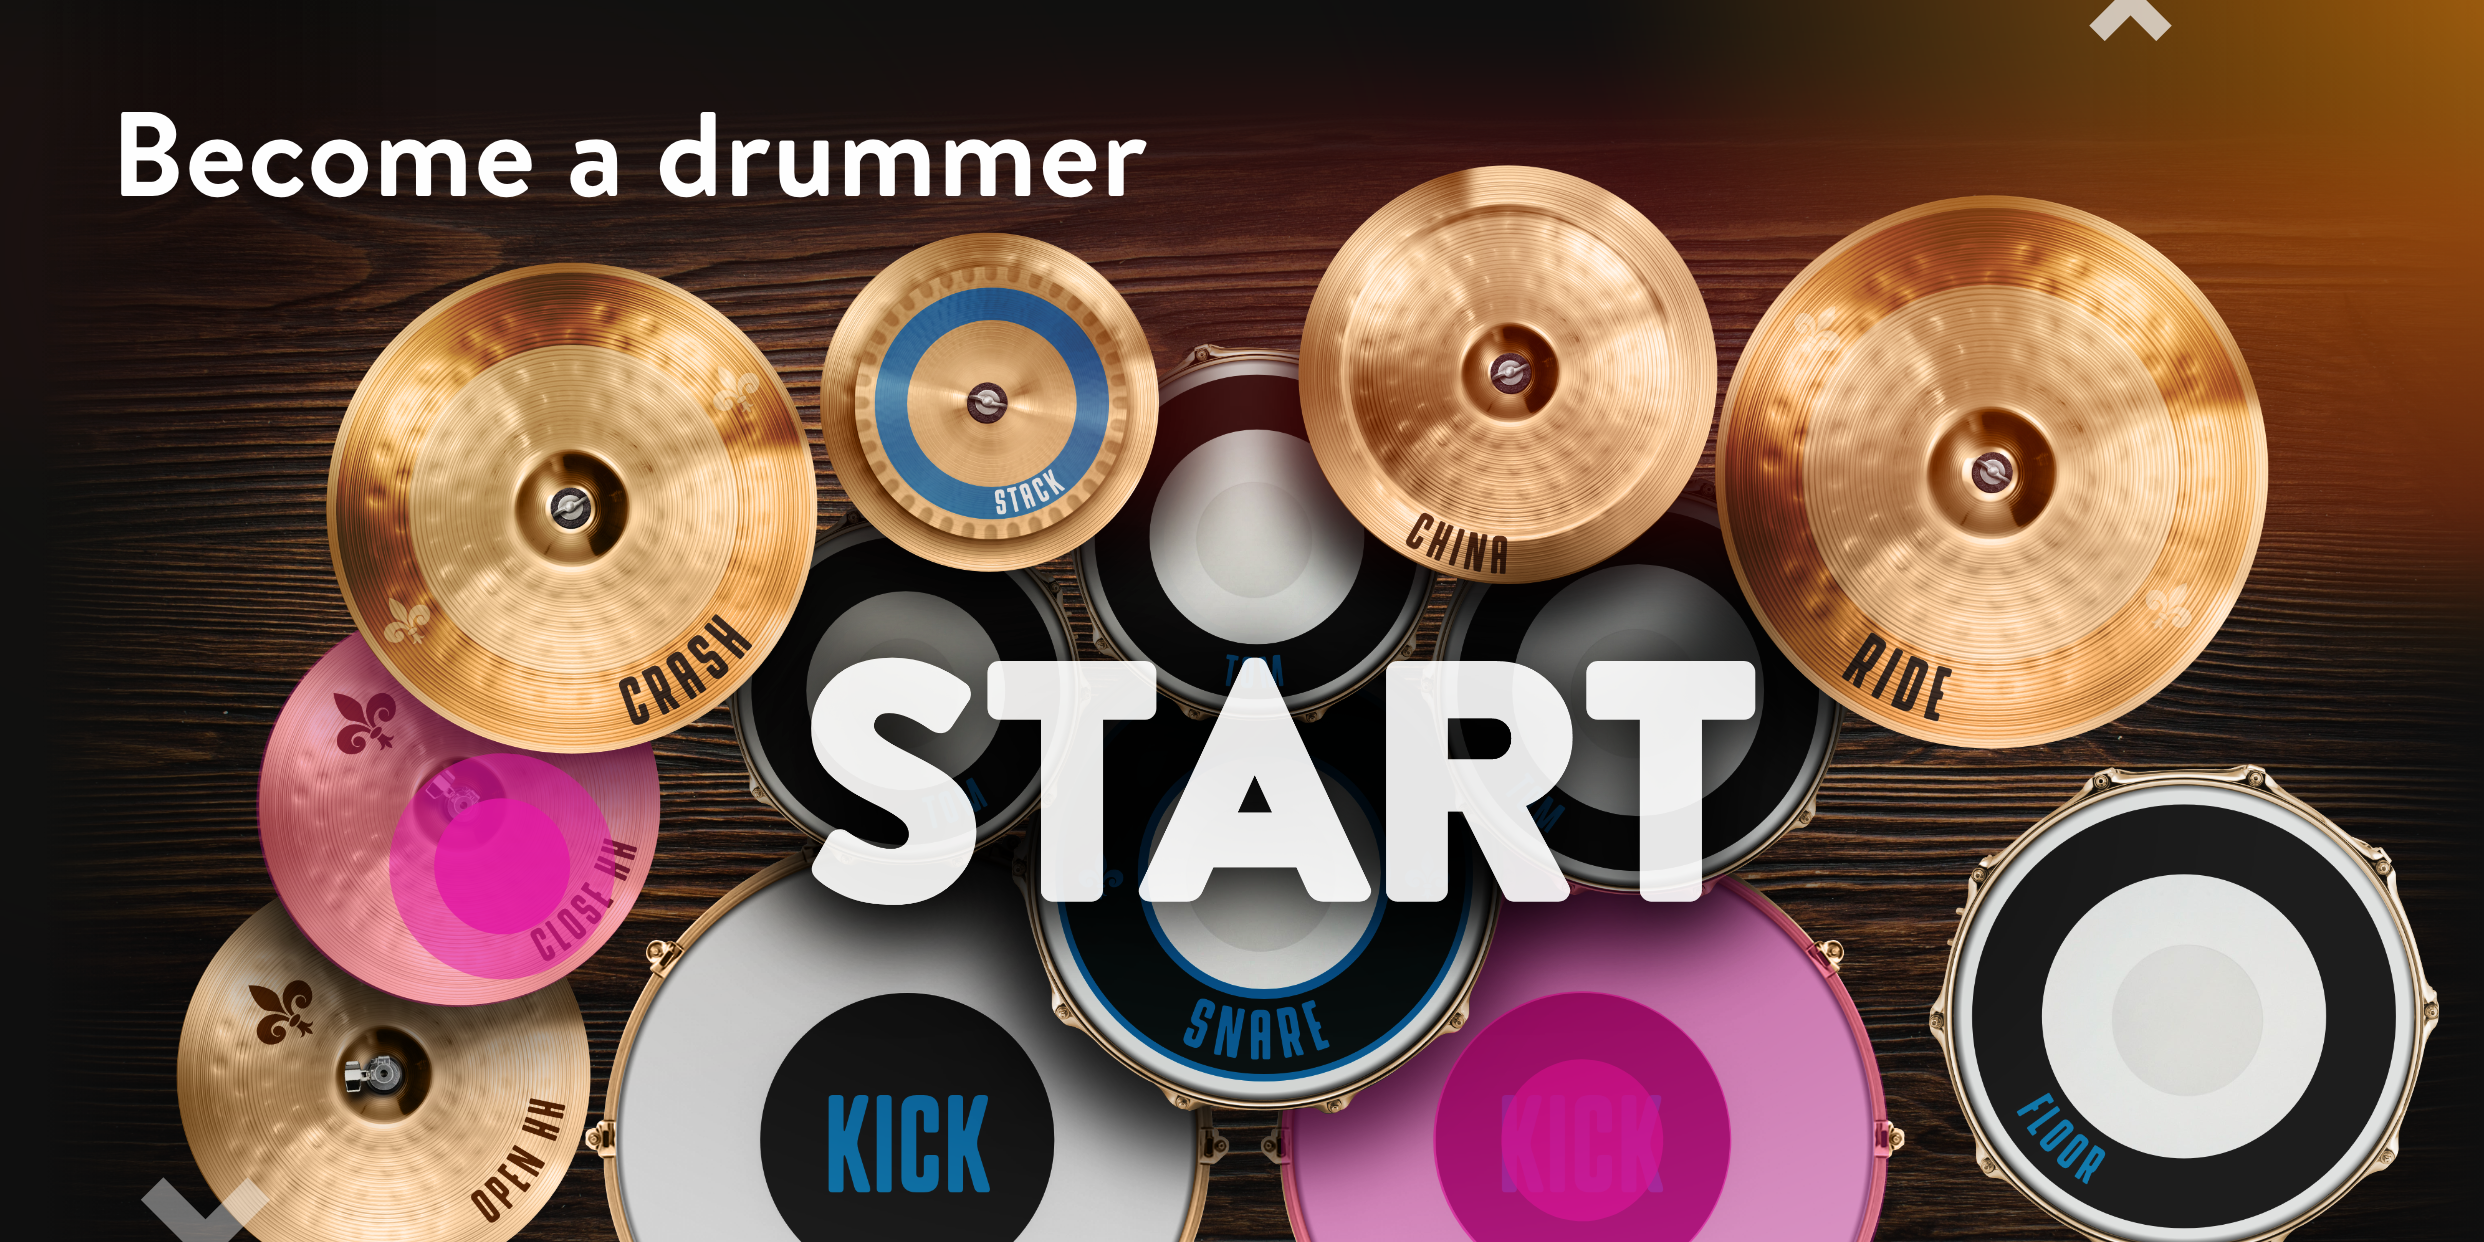 Android application Real Drum: electronic drums screenshort